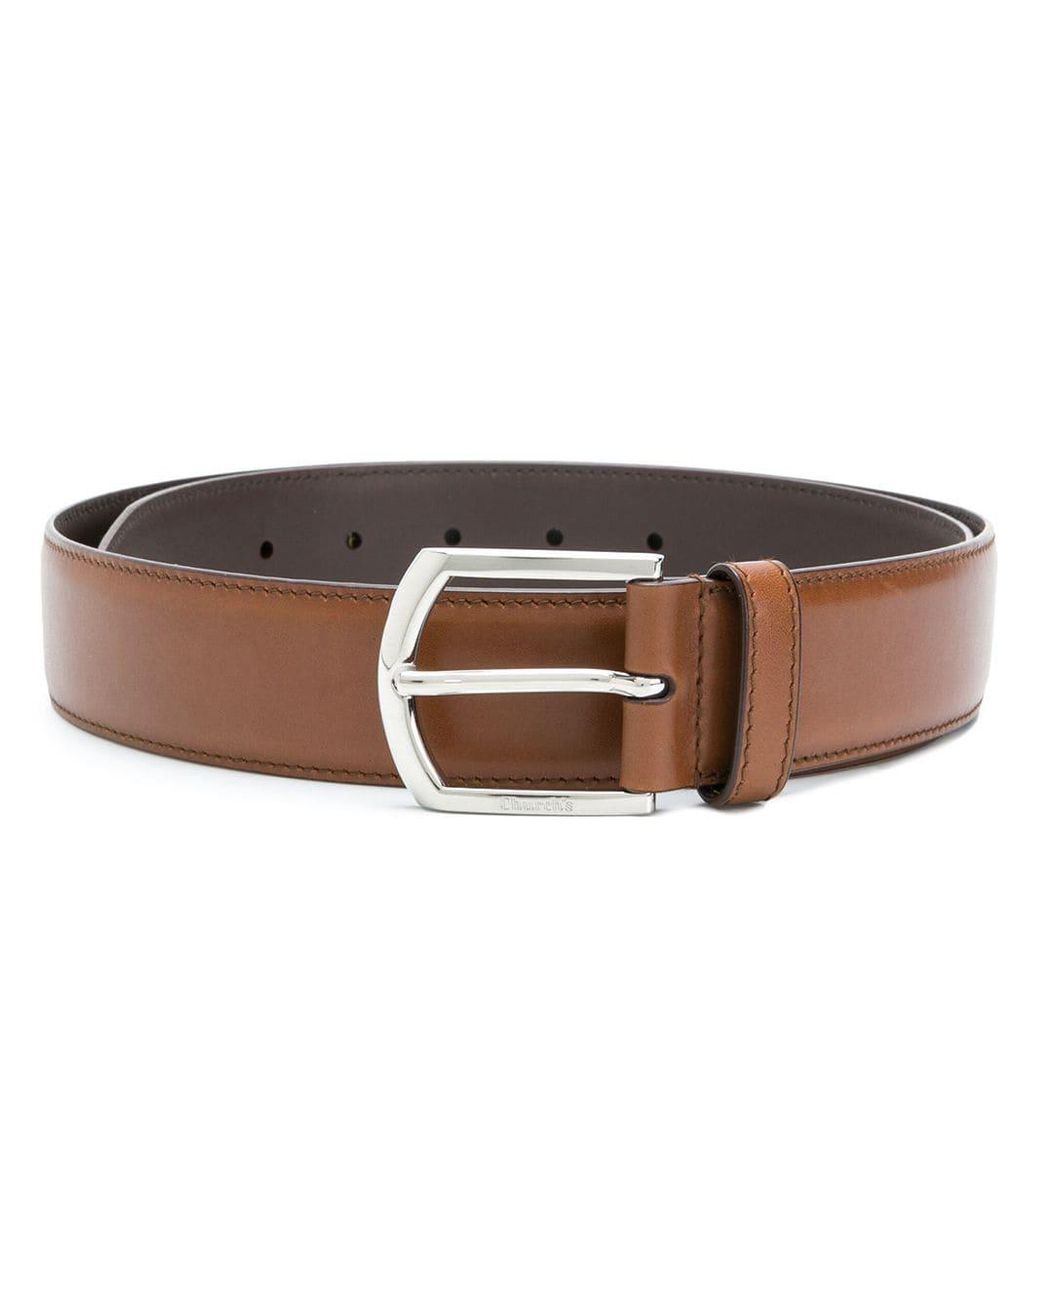 Church's Leather Classic Buckled Belt in Brown for Men - Lyst